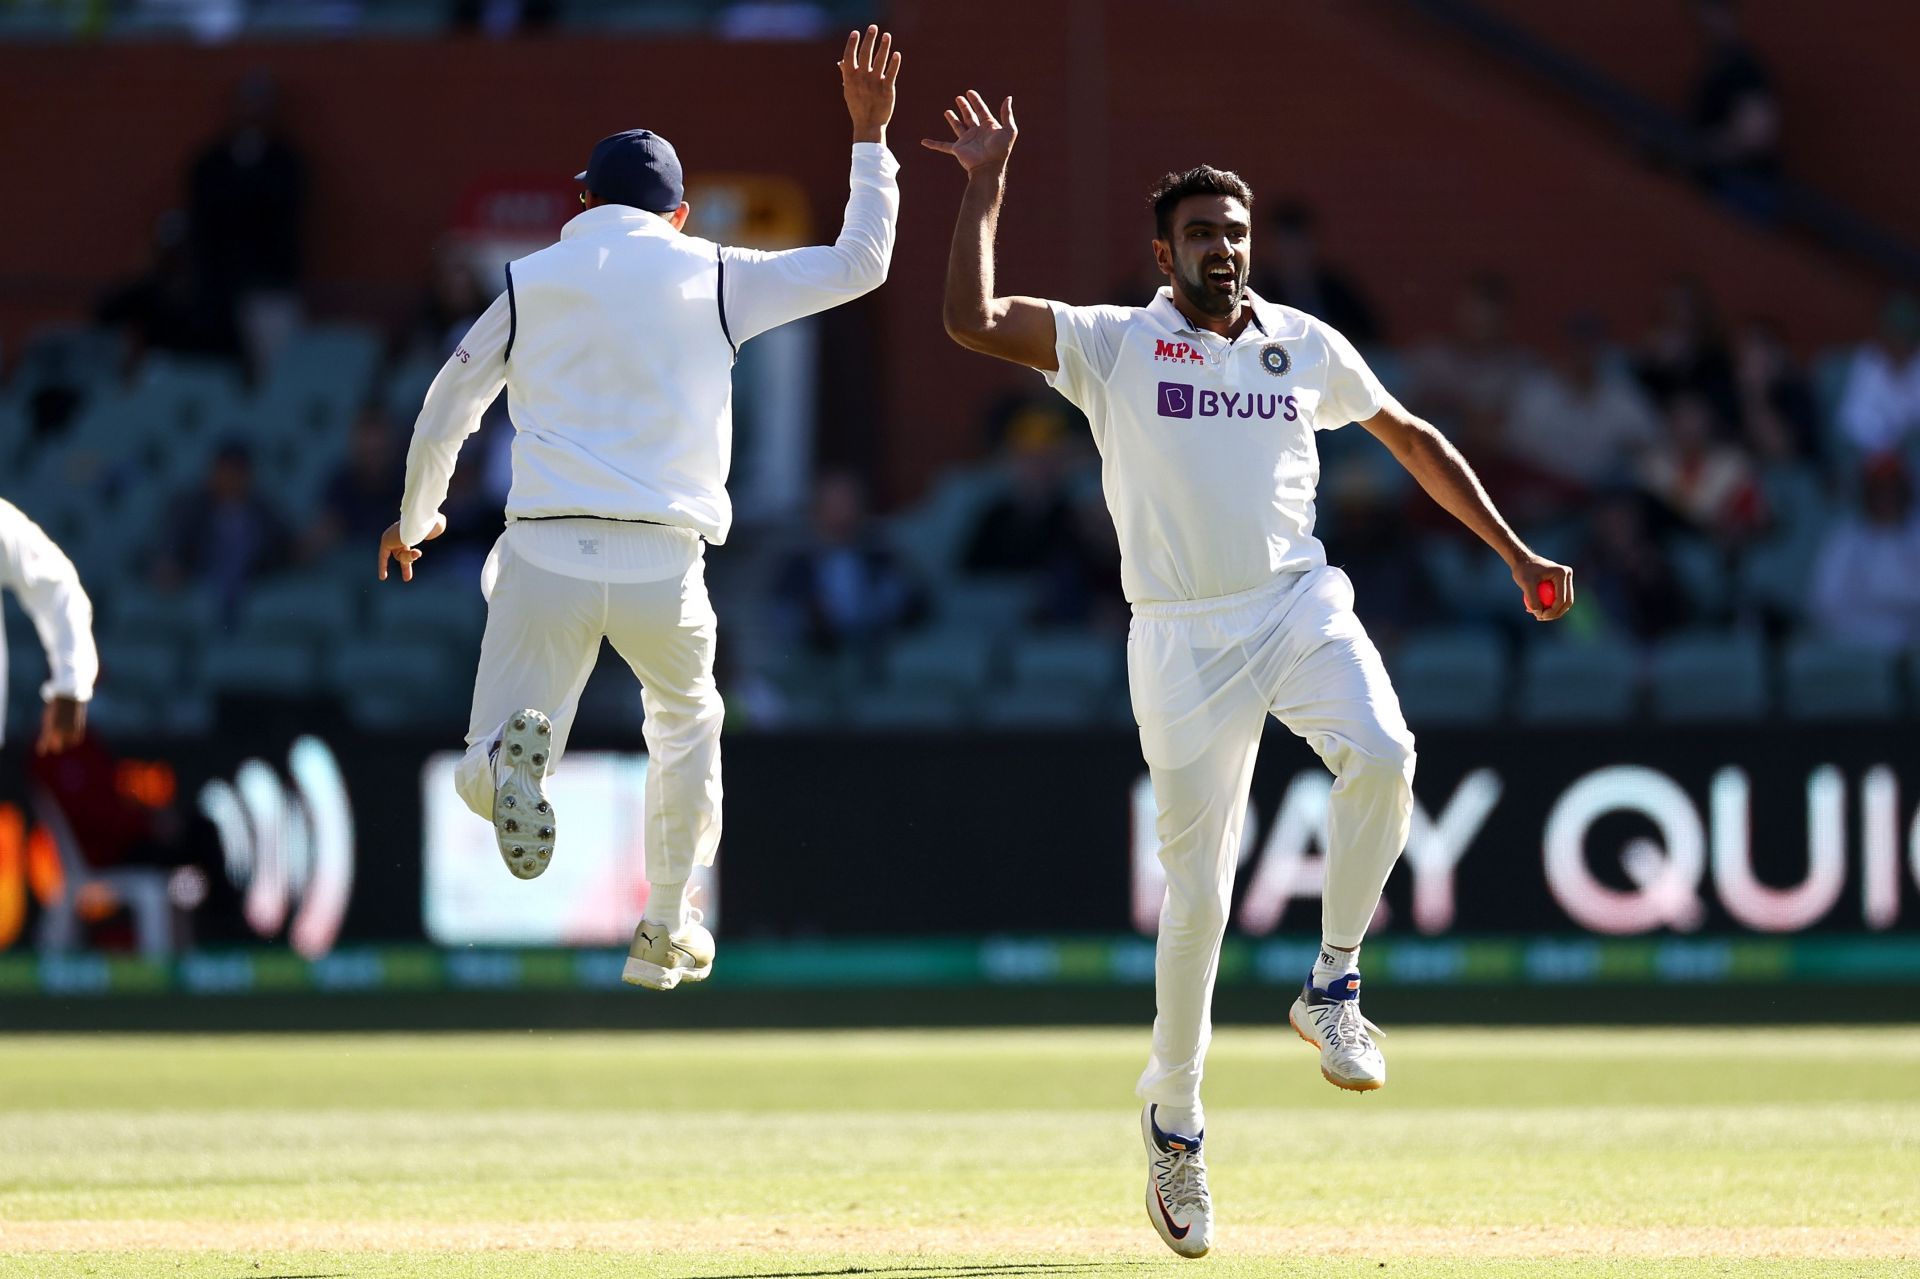 Ashwin brushed aside all the criticism that he faced ahead of the game to put up a fine performance